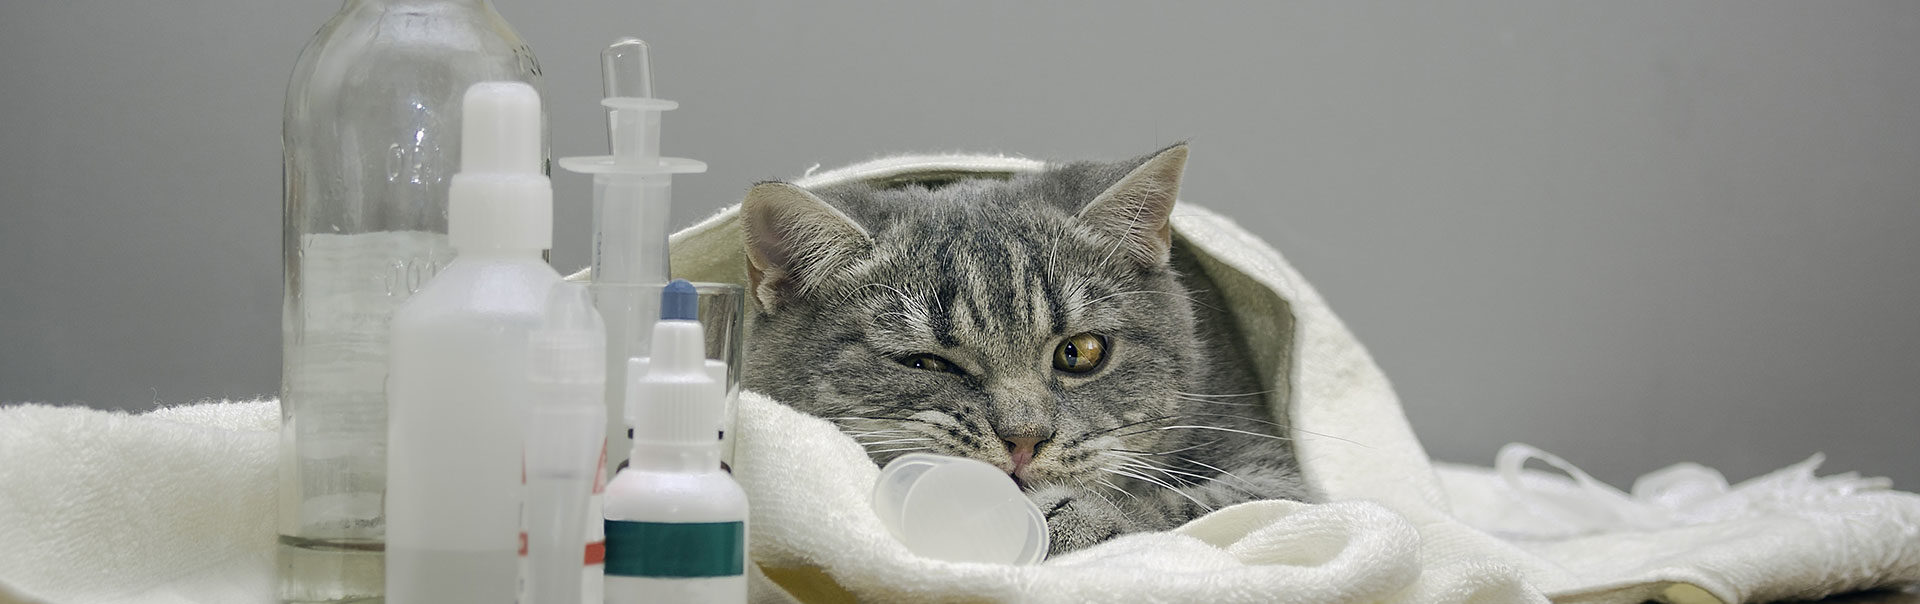 Cat wrapped in a blanket next to medical supplies